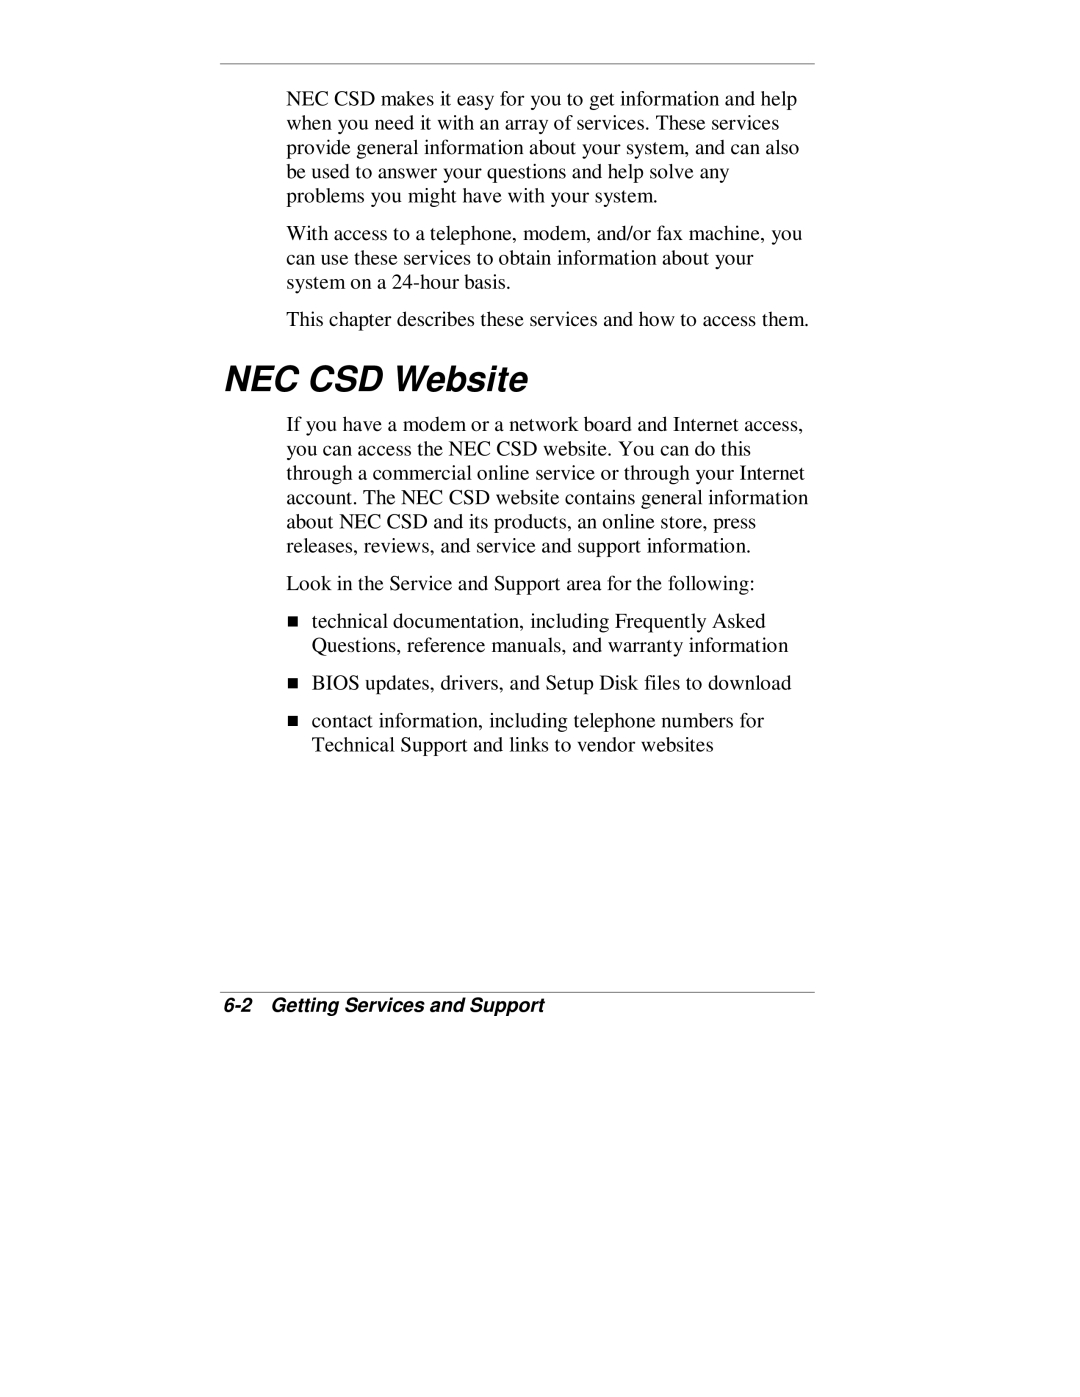 NEC VT 300 Series manual NEC CSD Website, 6-2Getting Services and Support 